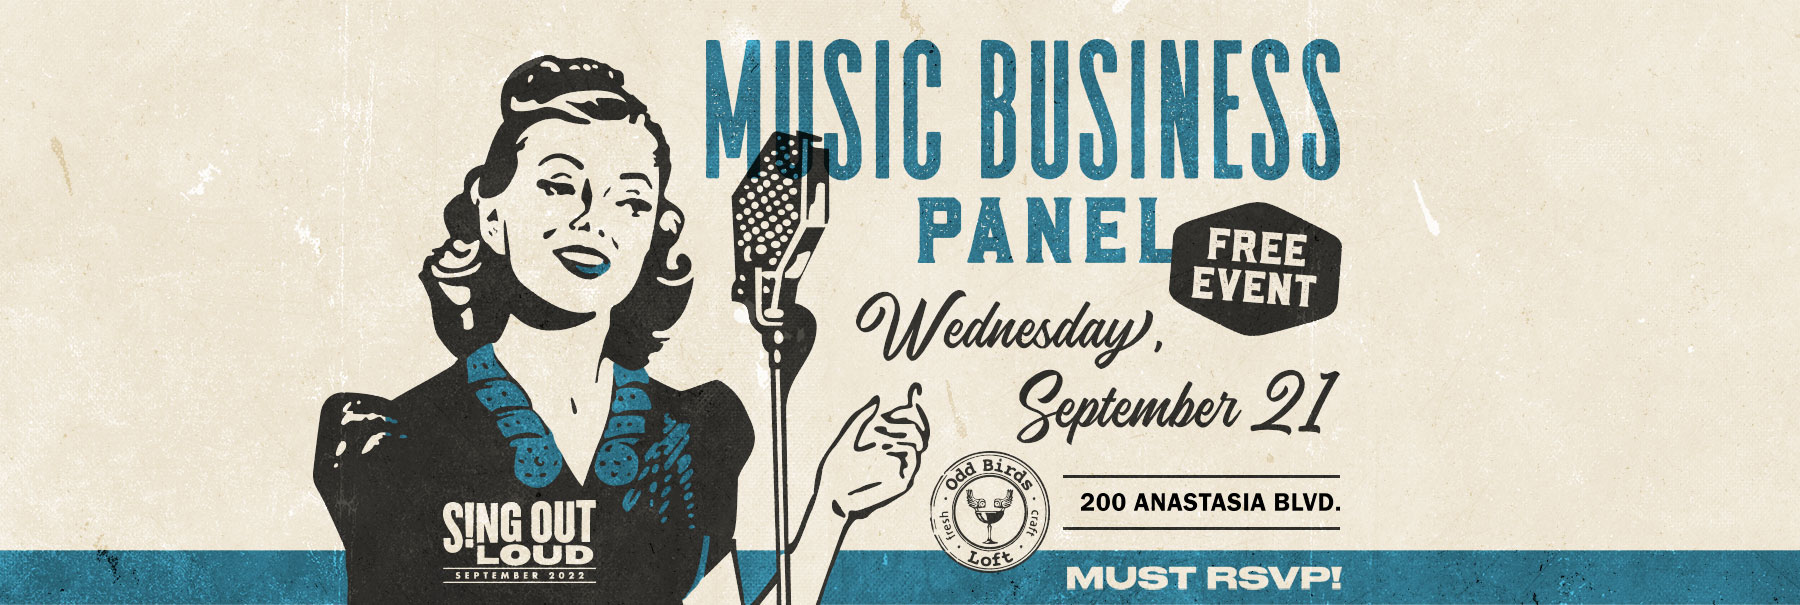 Featured image for “Music Business Panel Discussion”